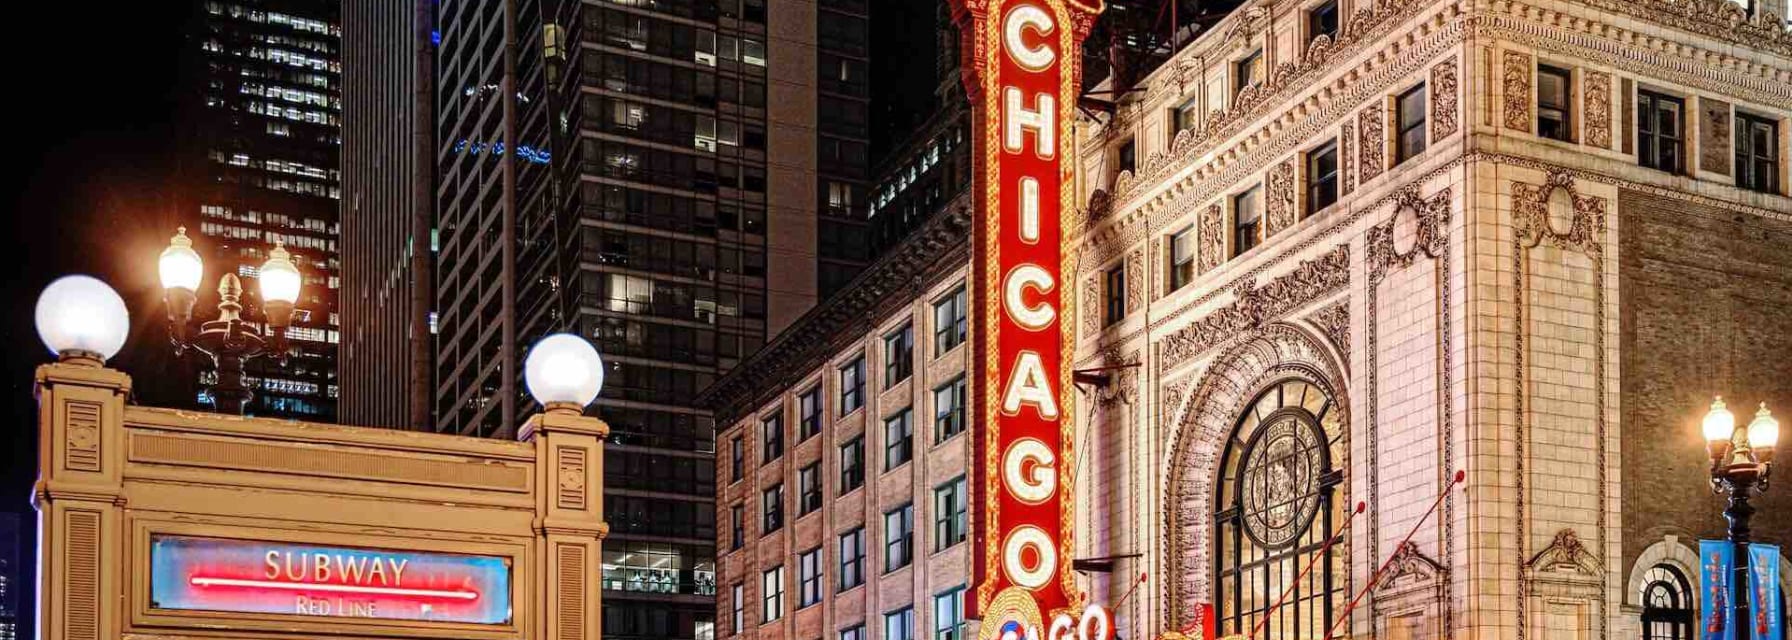 the chicago theater at night